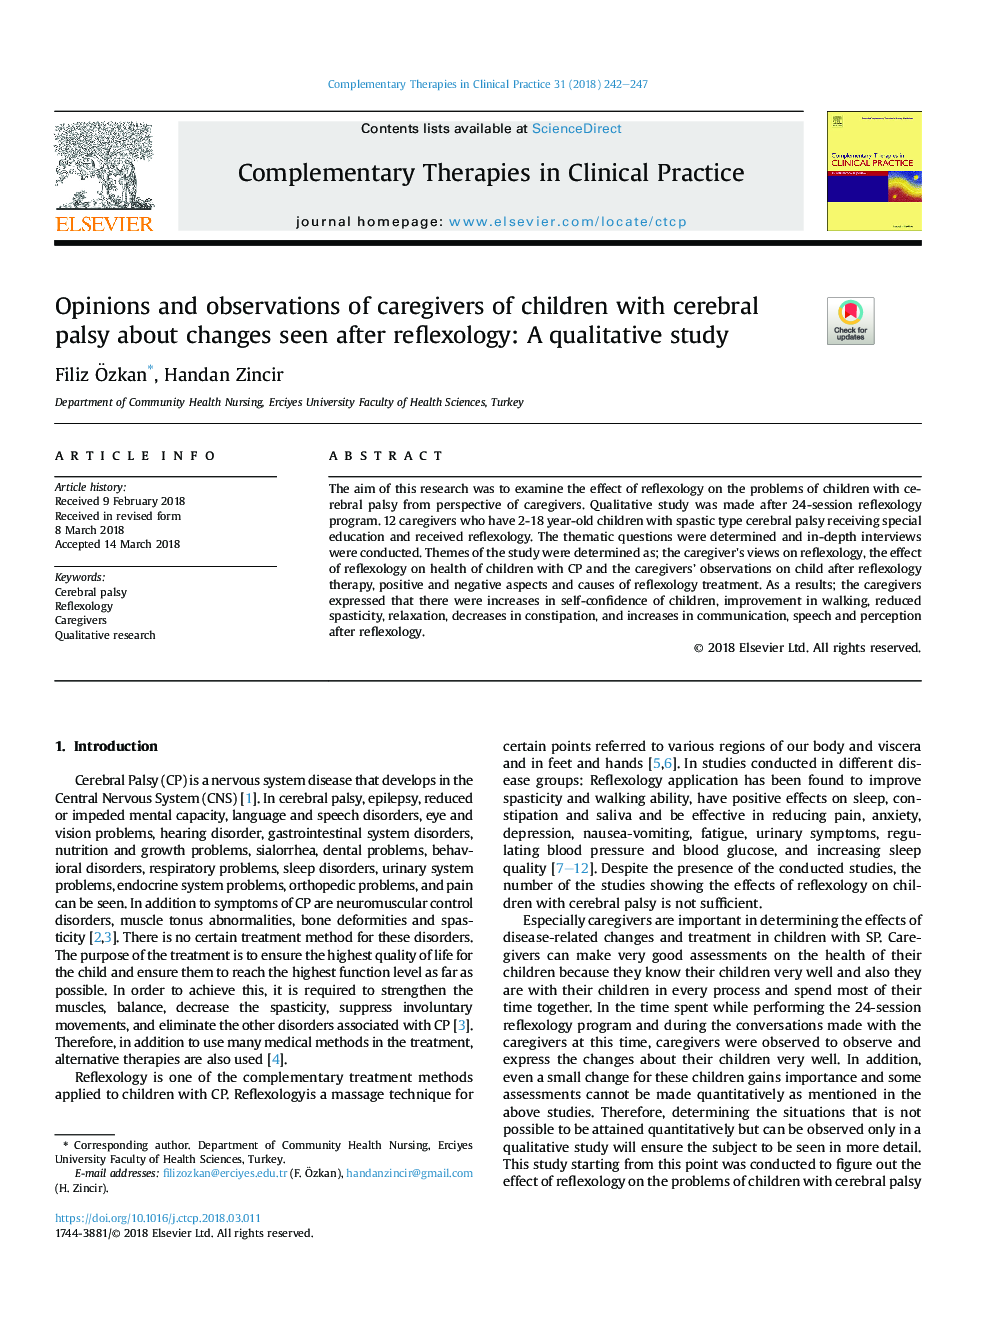 Opinions and observations of caregivers of children with cerebral palsy about changes seen after reflexology: A qualitative study